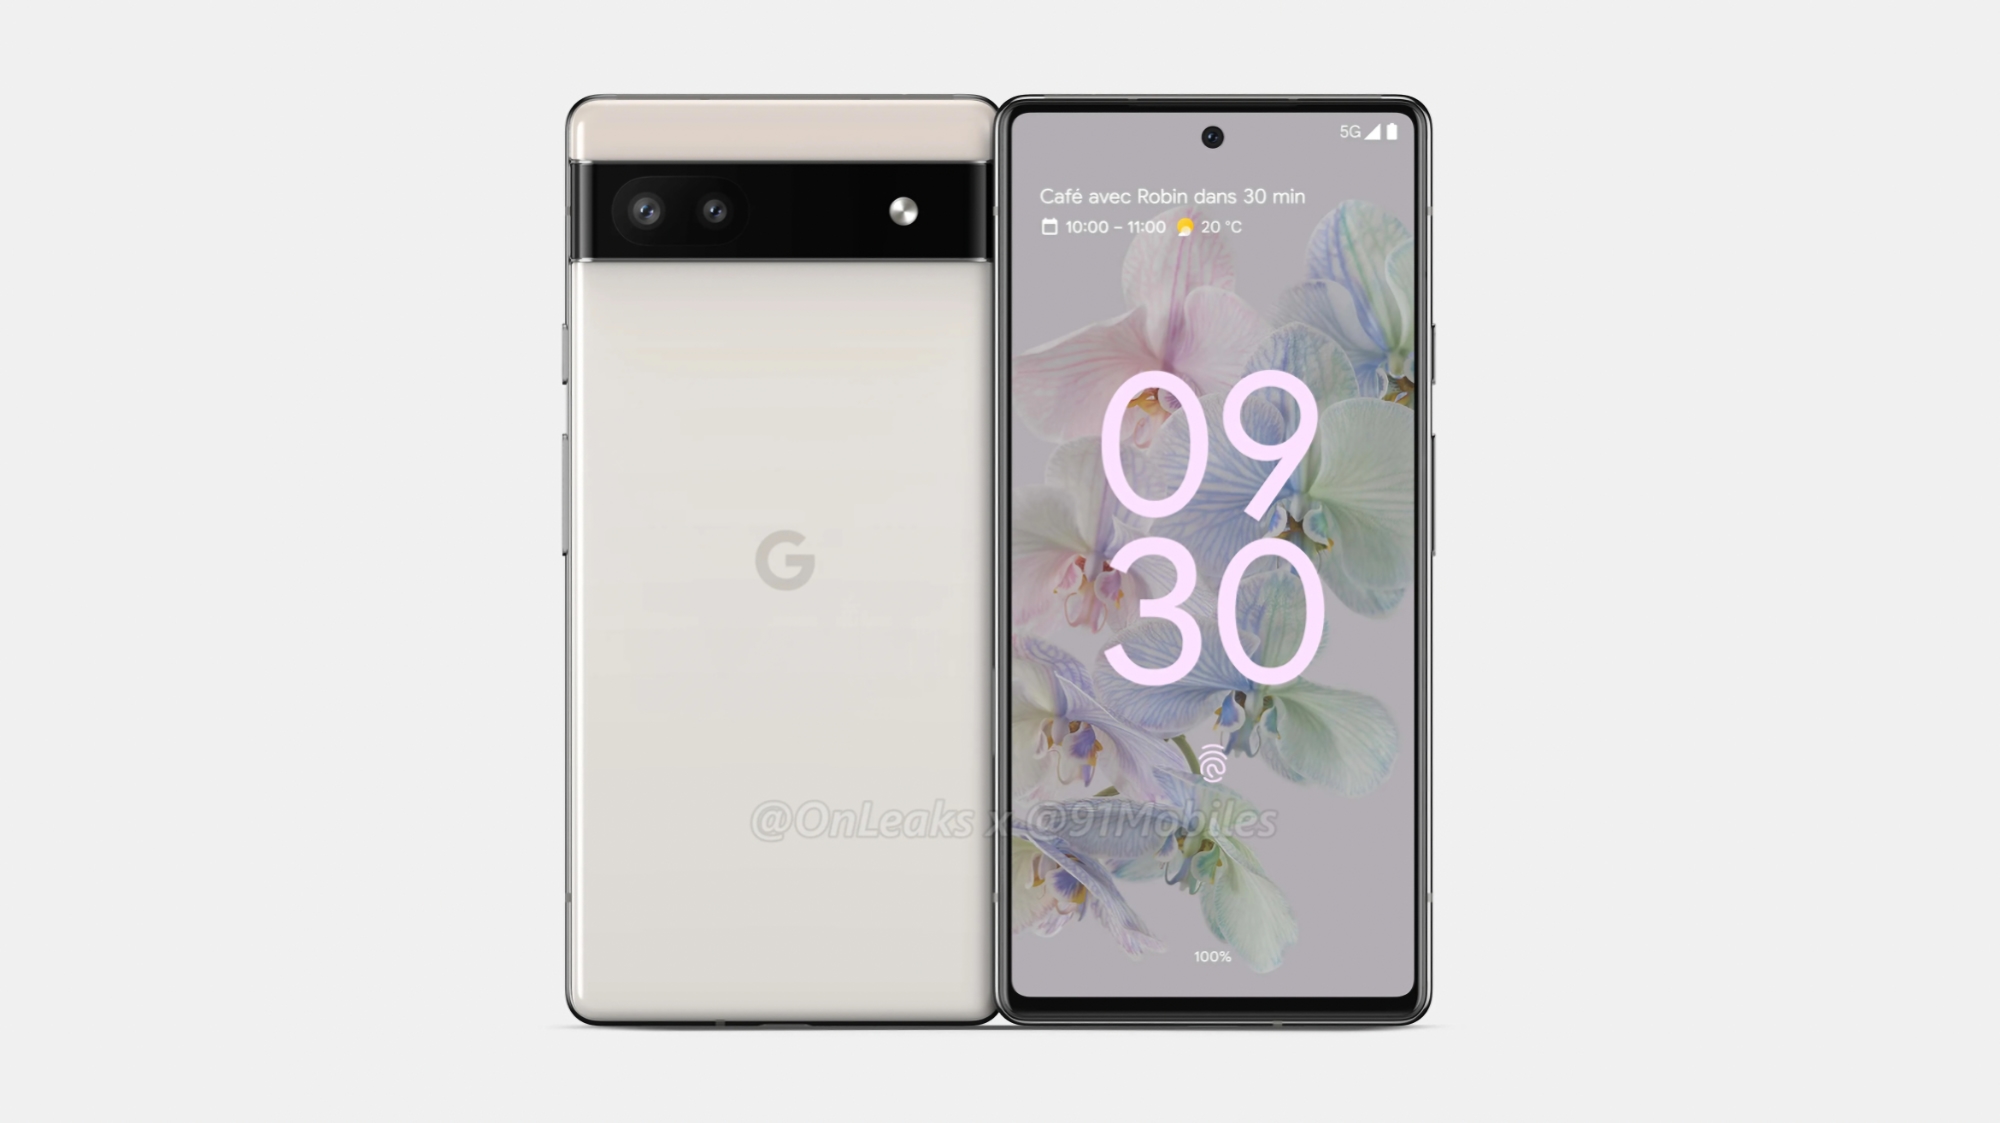 Insider: budget smartphone Pixel 6a with a dual camera and a Tensor chip will debut in May